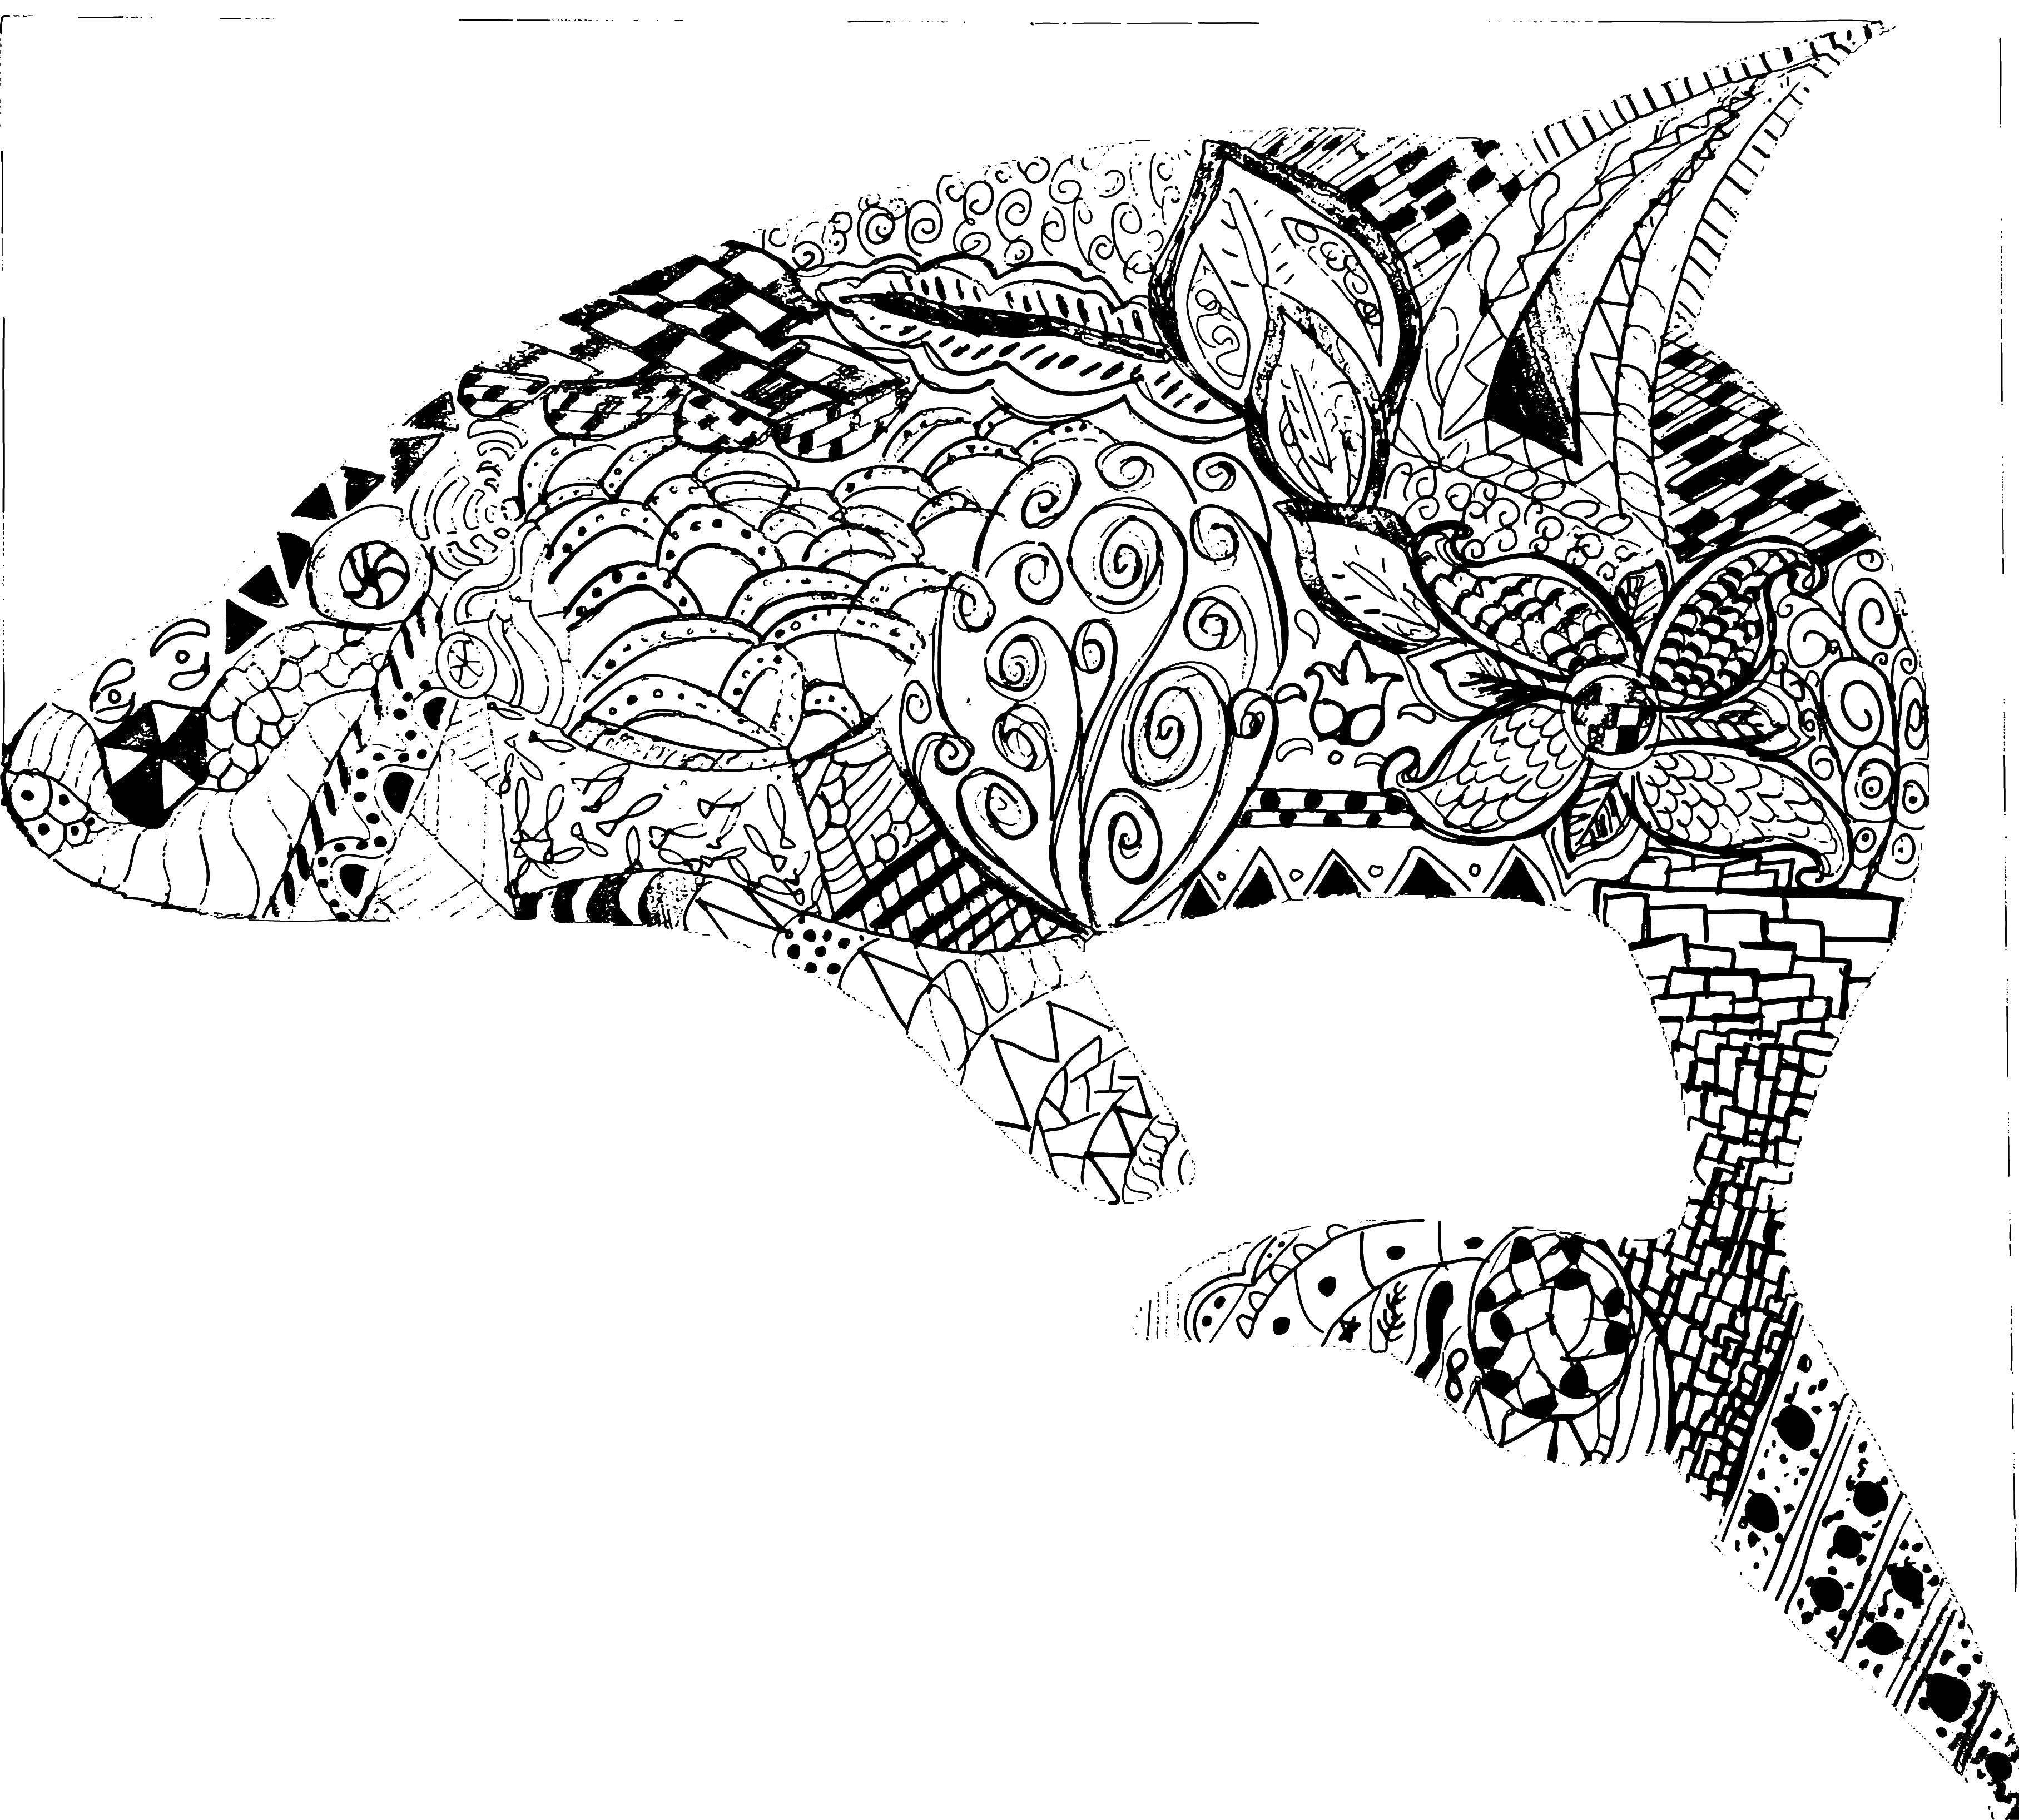 Coloring Patterned whale. Category patterns. Tags:  Patterns, animals.